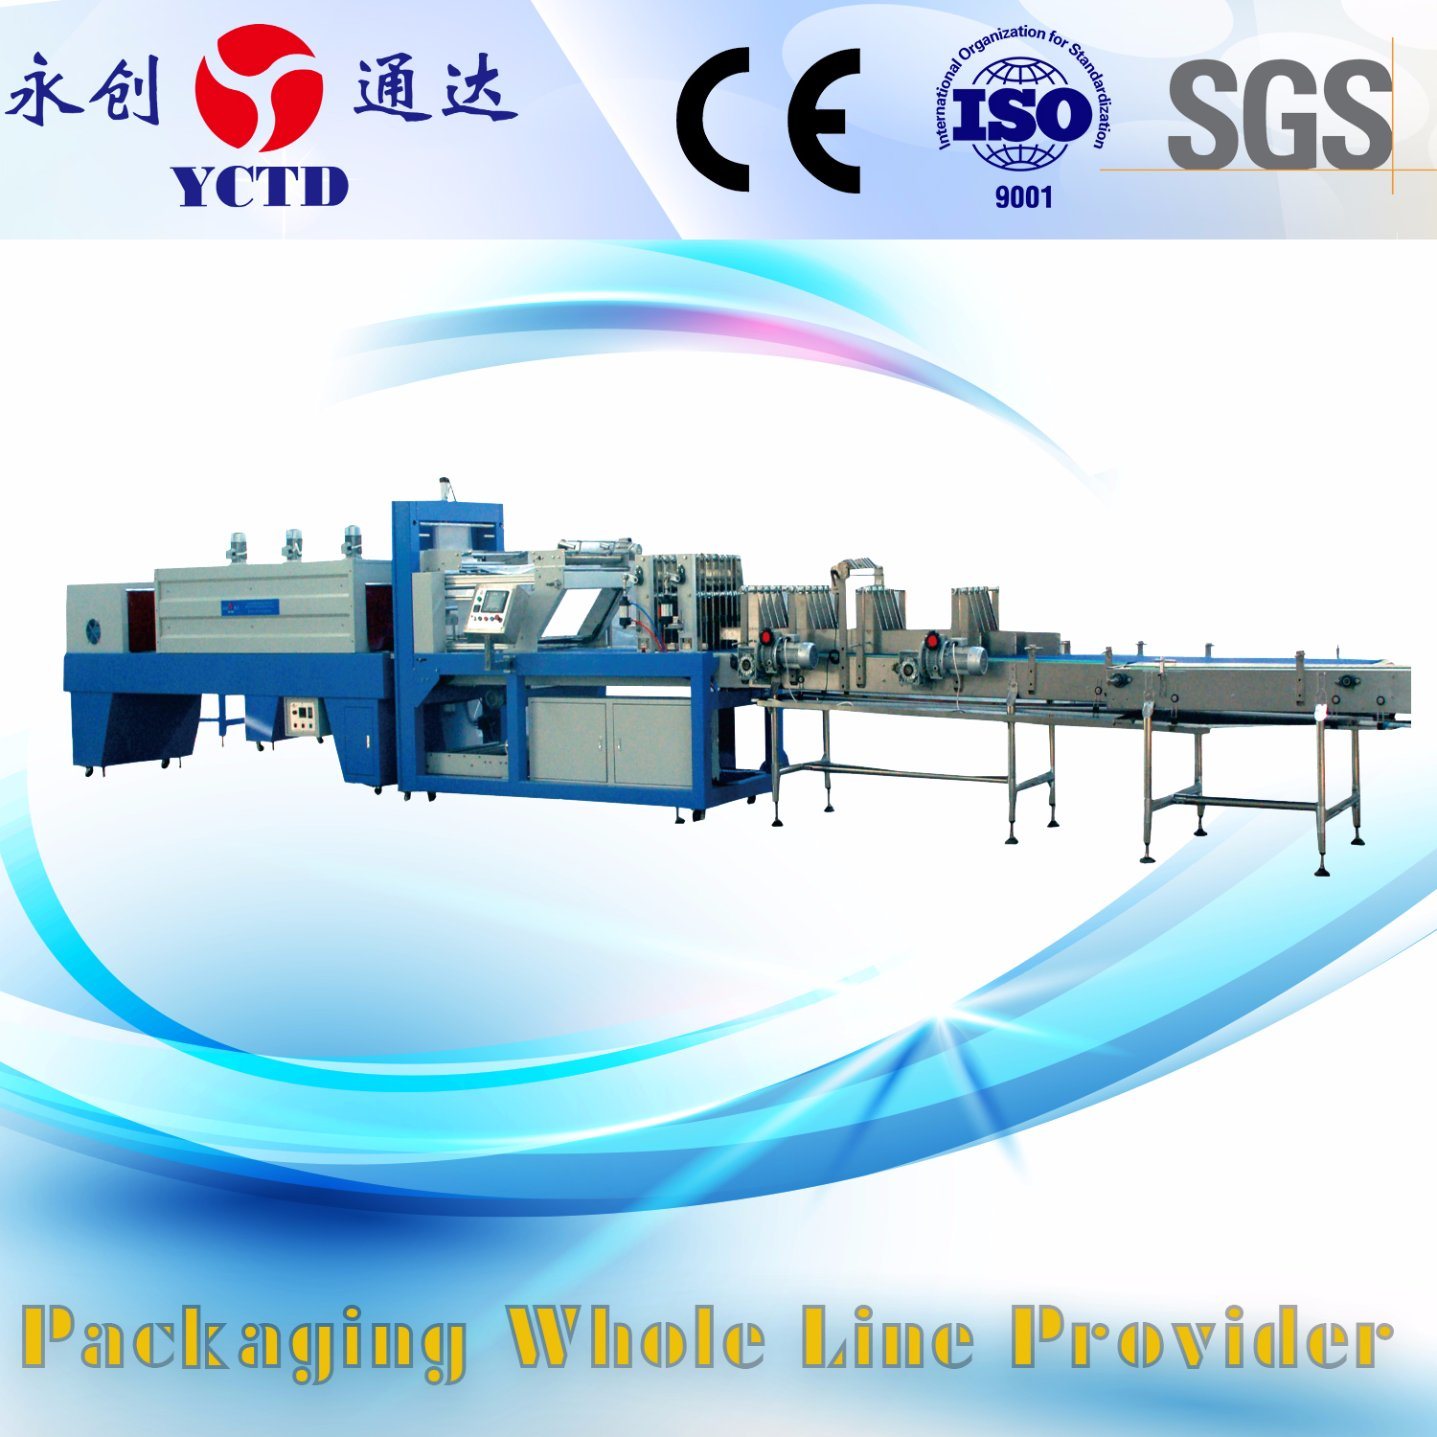 Hot Shrink Wrapping Machine Packaging Machine (YCTD)